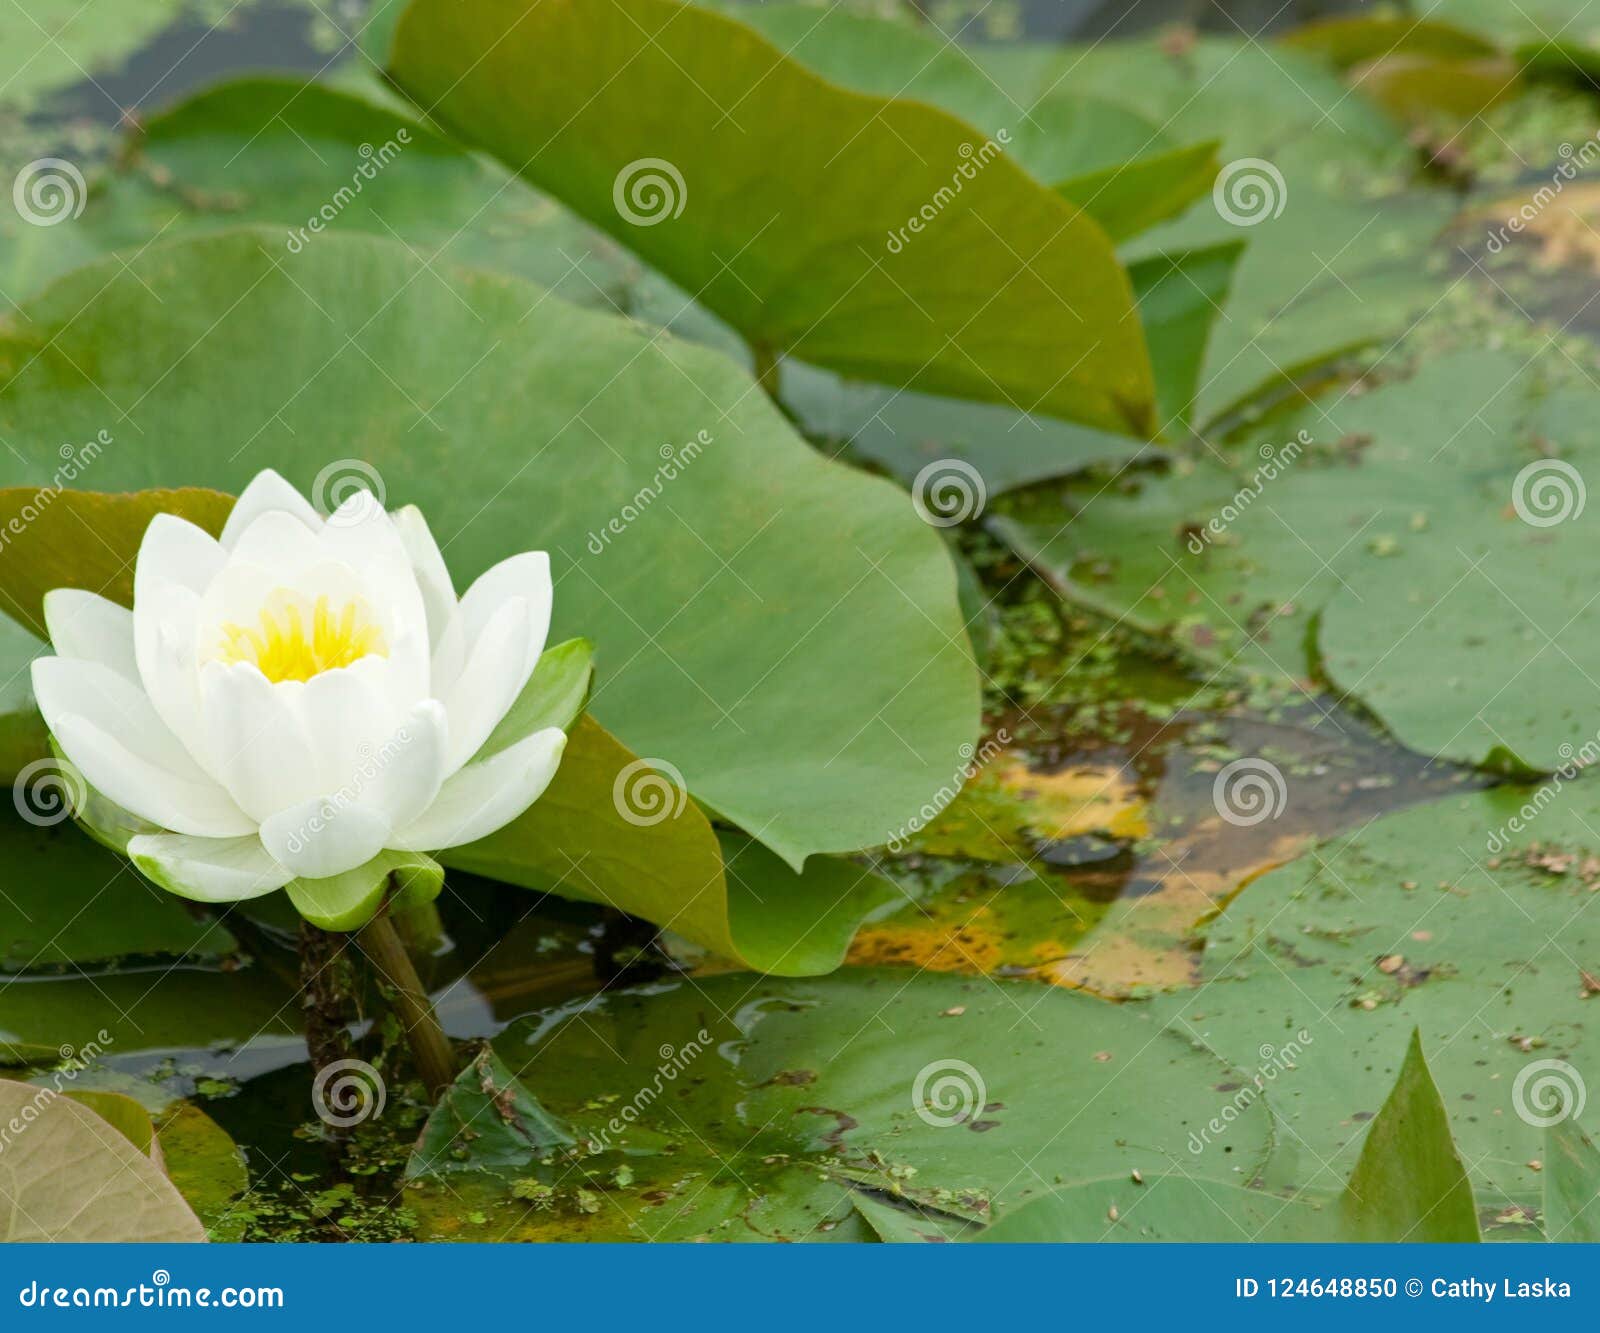 white and yellow water lily on lily pad